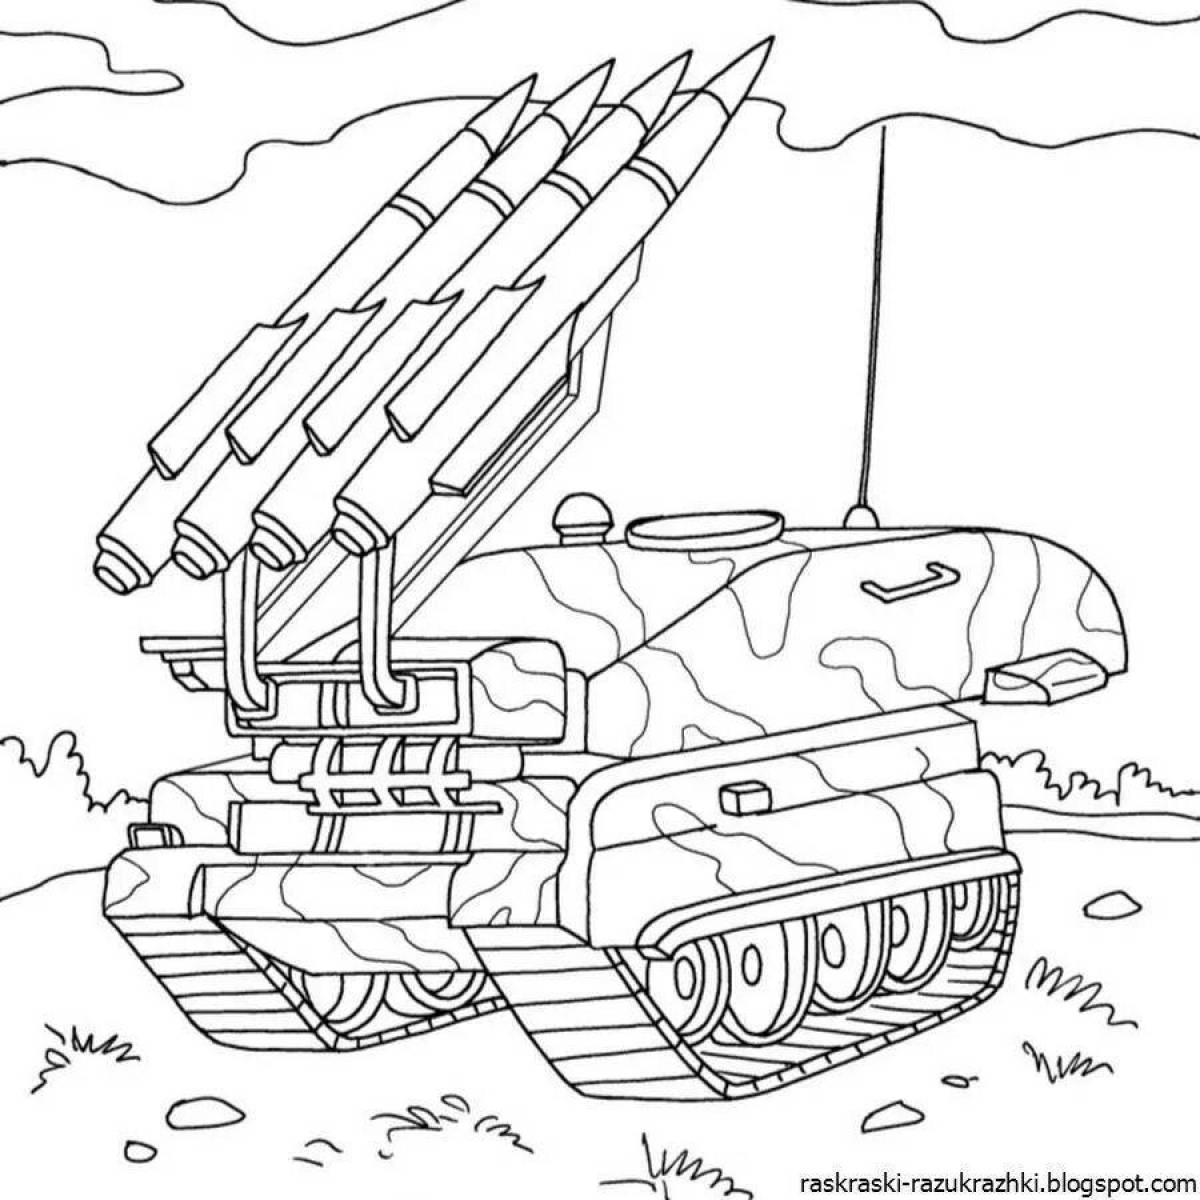 Bright Russian military equipment coloring book